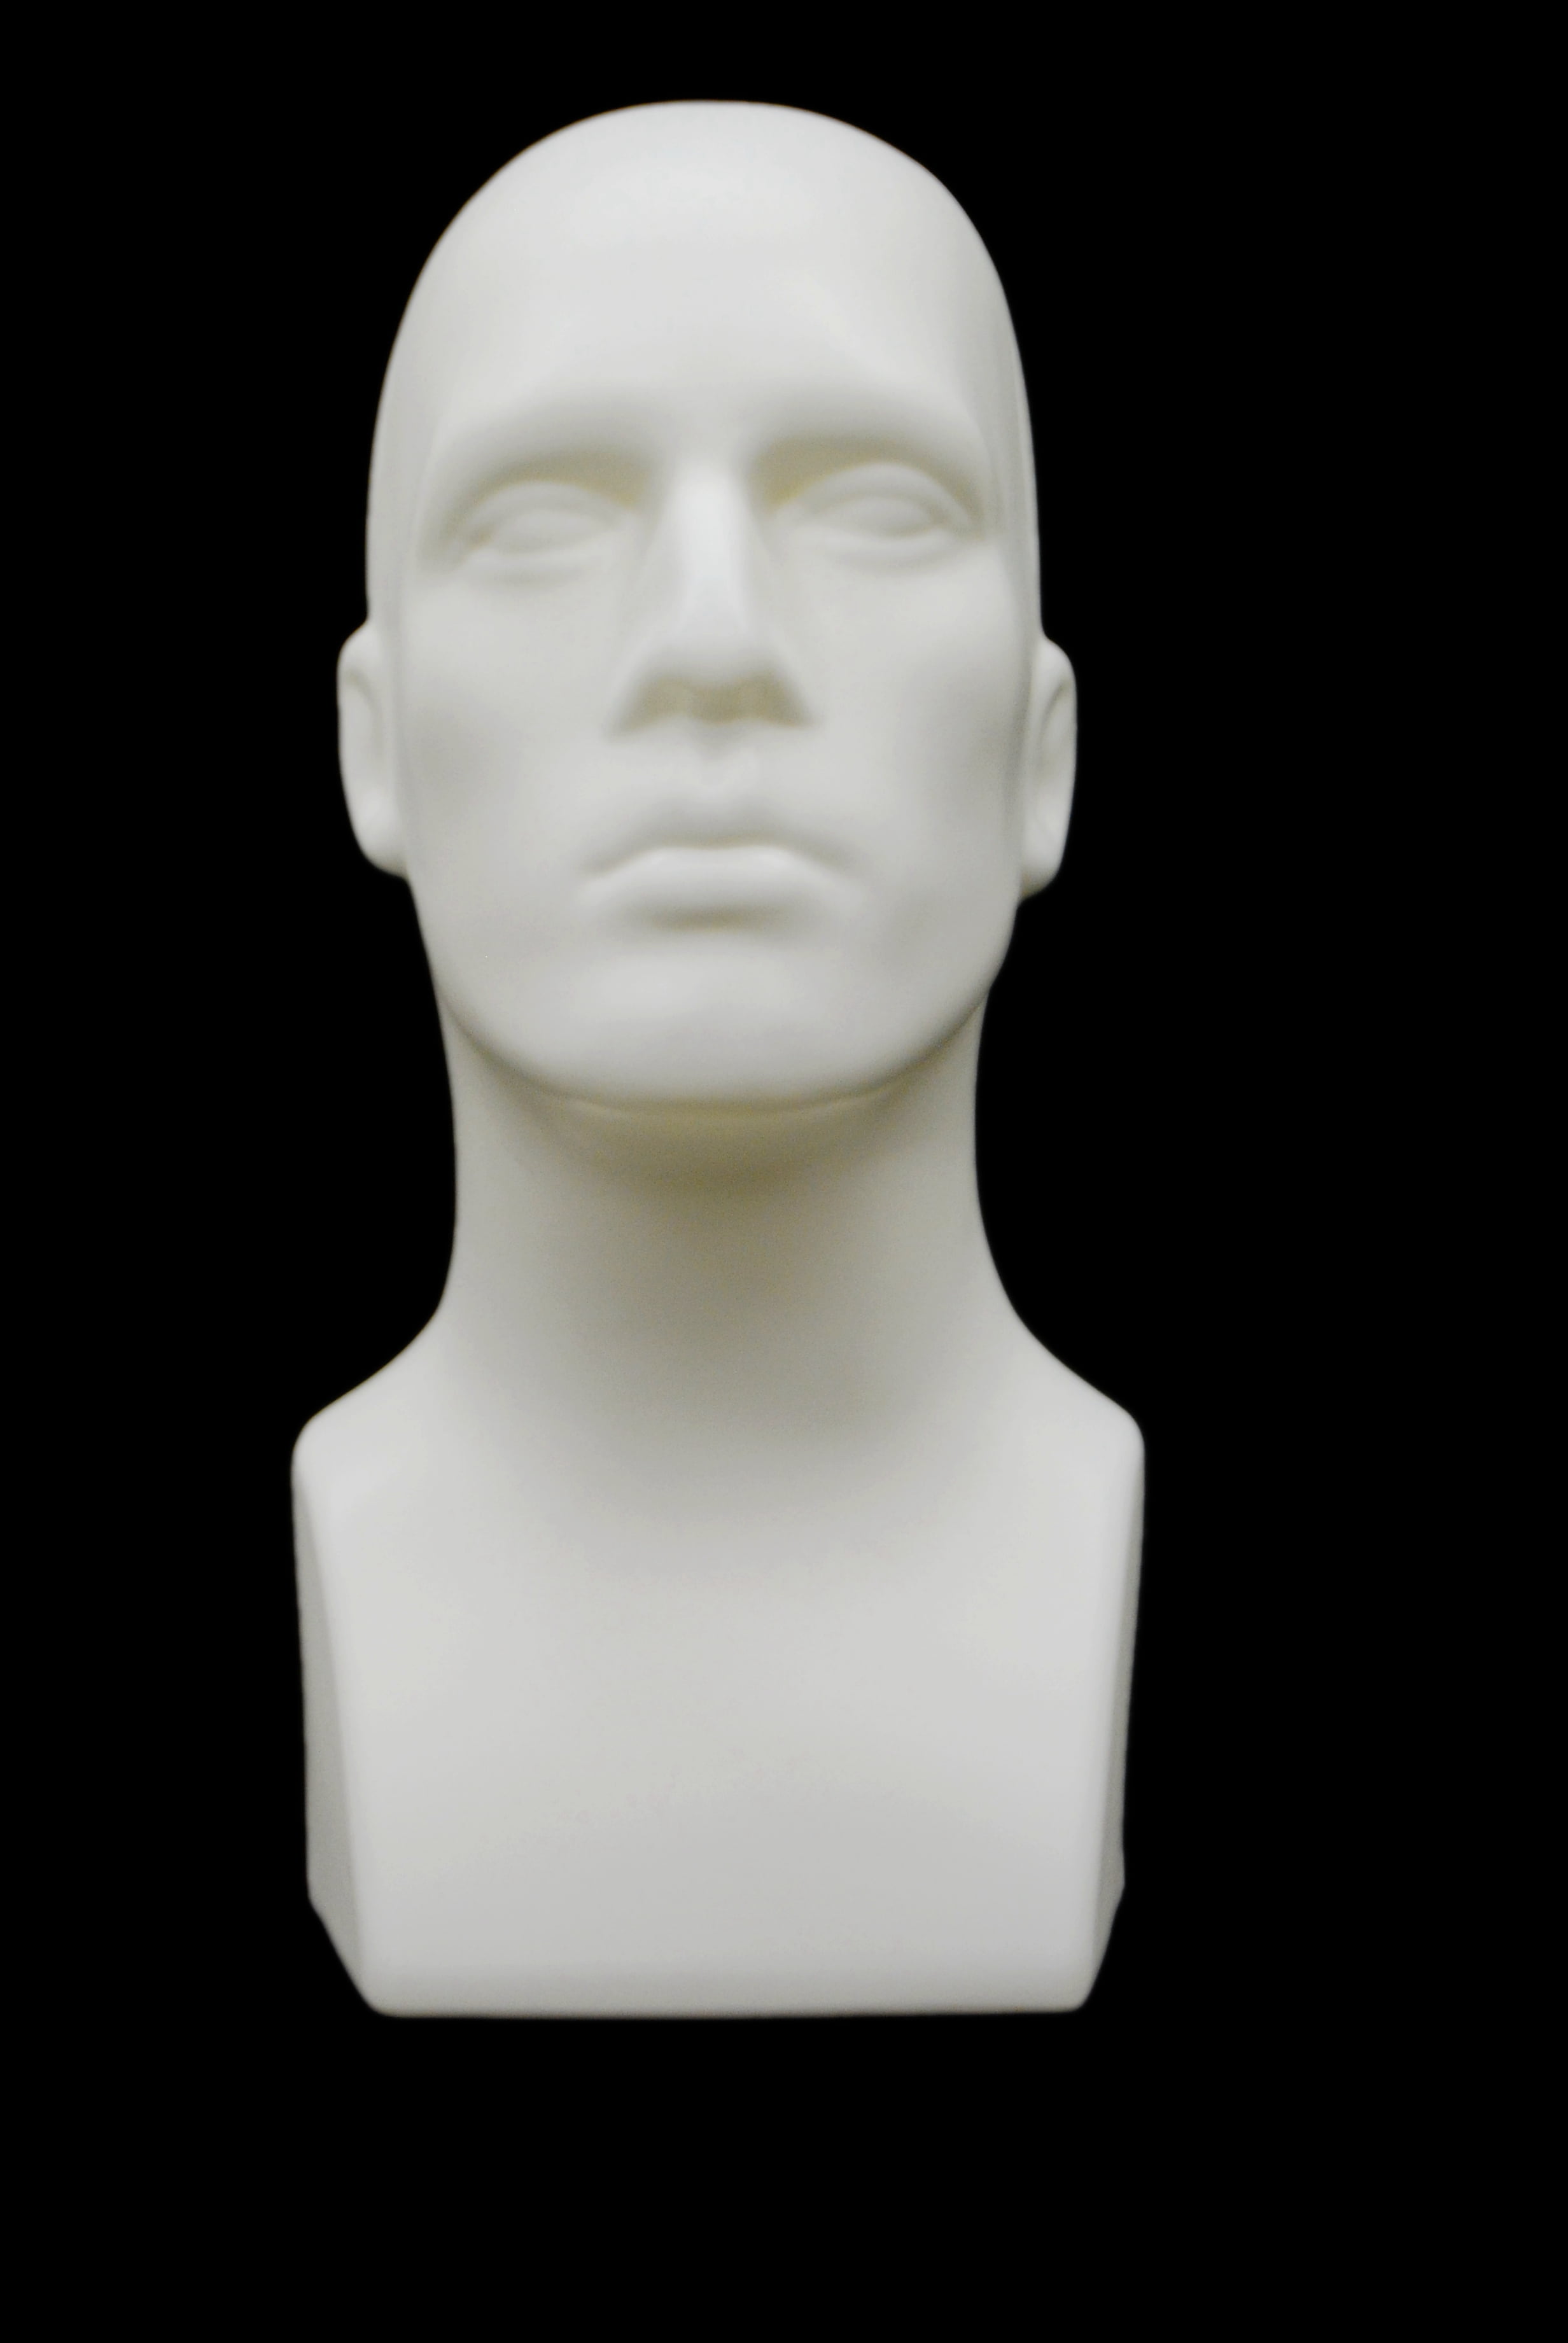 Adult Male Plastic Gray Mannequin Head Display 16" Tall #M-GY 